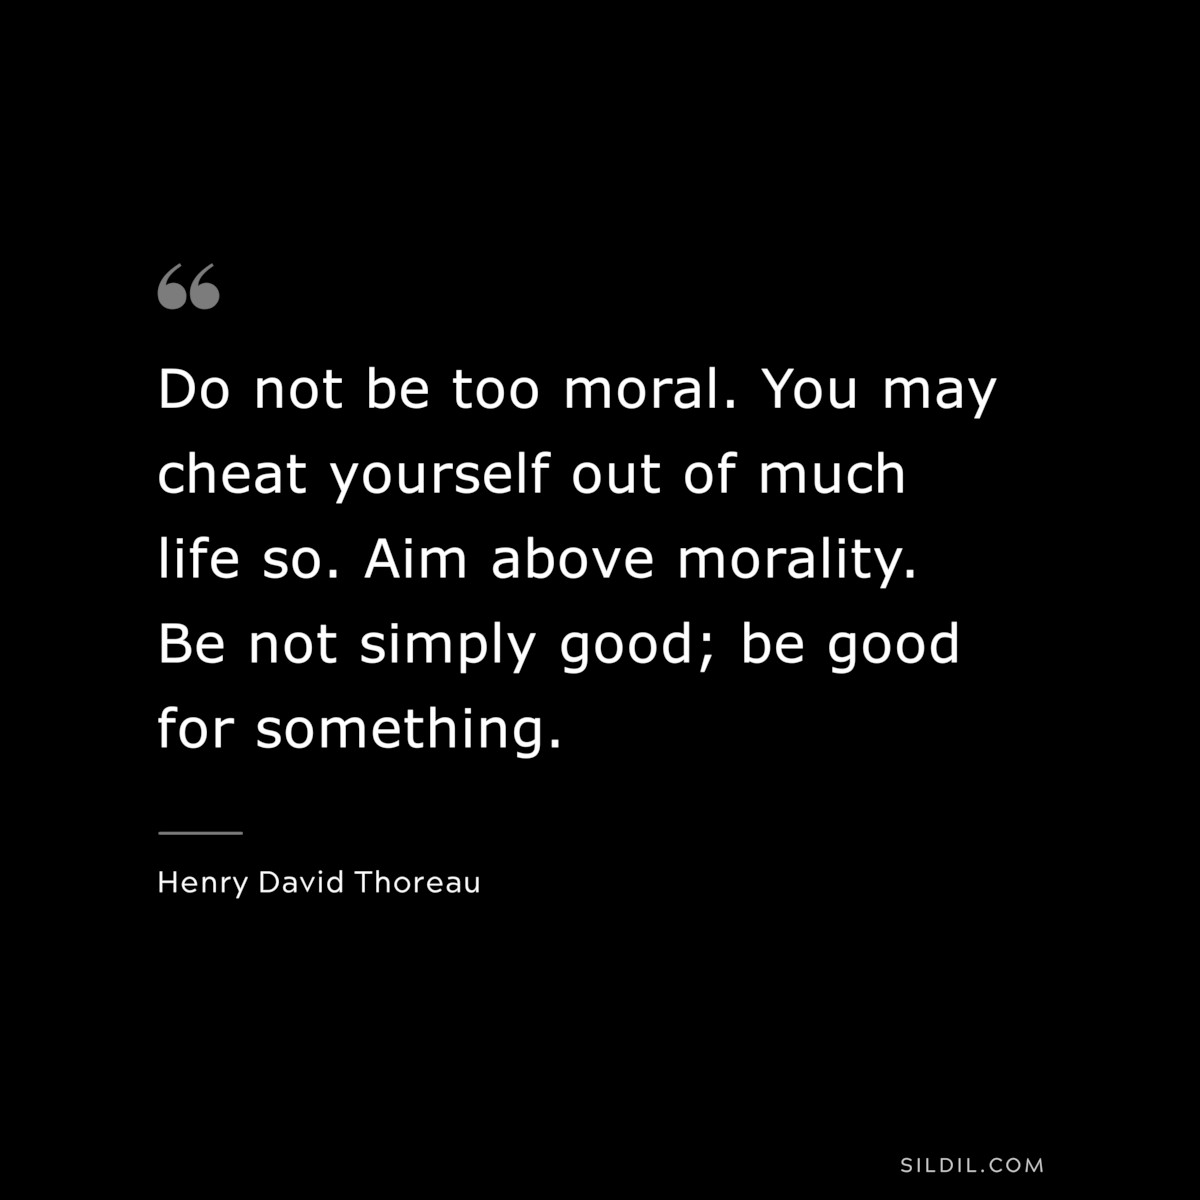 Do not be too moral. You may cheat yourself out of much life so. Aim above morality. Be not simply good; be good for something. — Henry David Thoreau